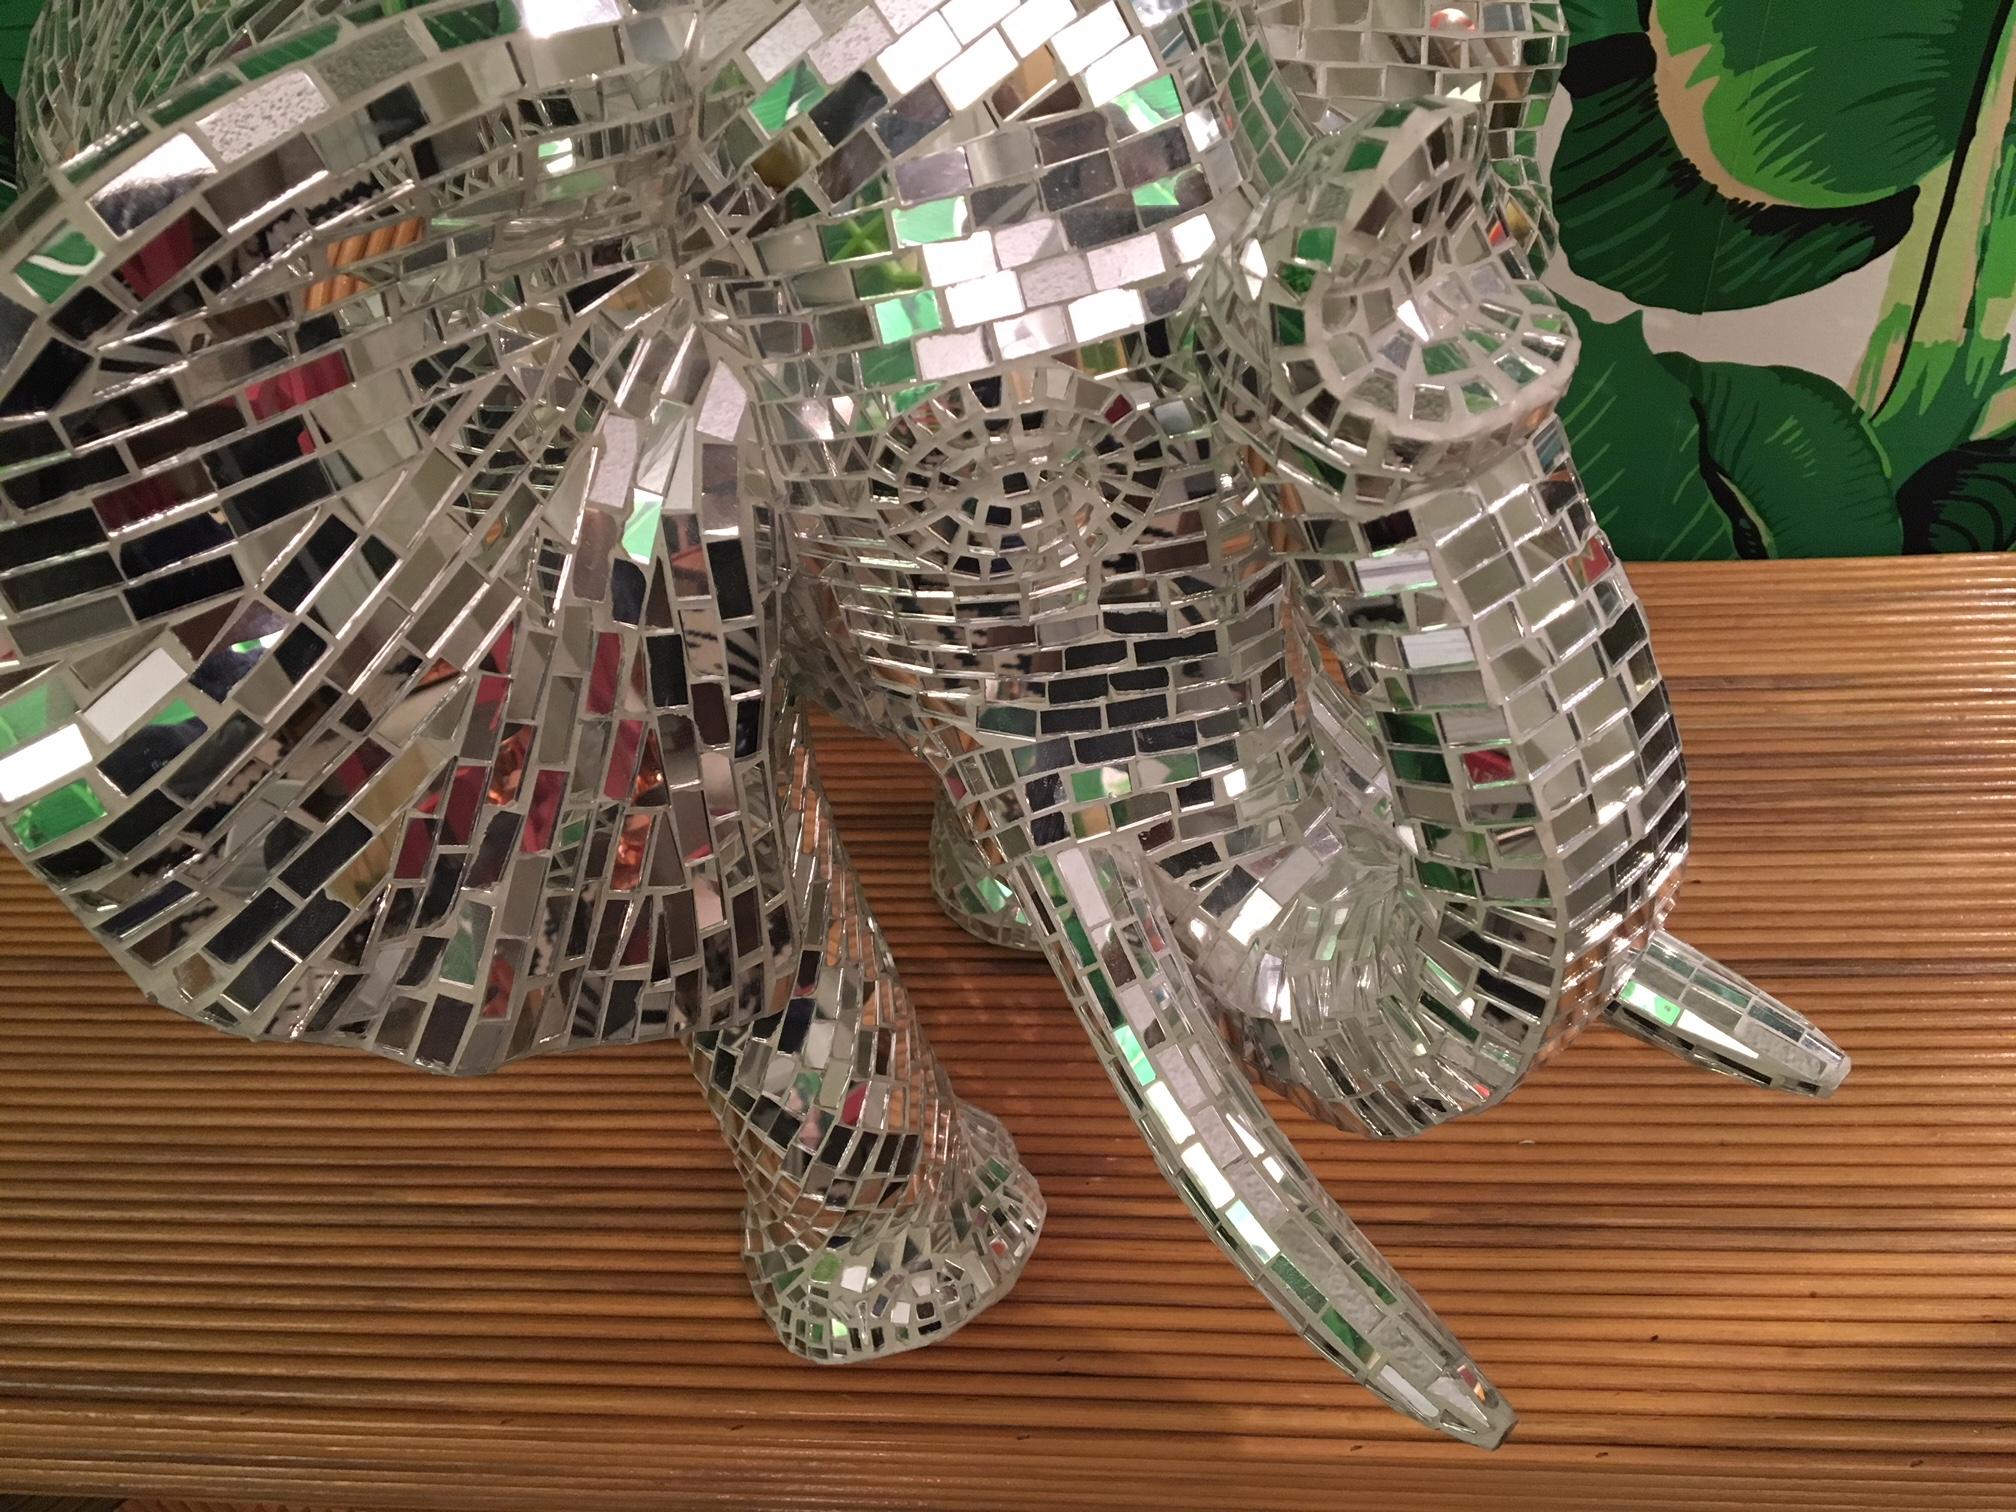 Large elephant sculpture covered in mirror tiles makes a statement in any decor. Stands 19